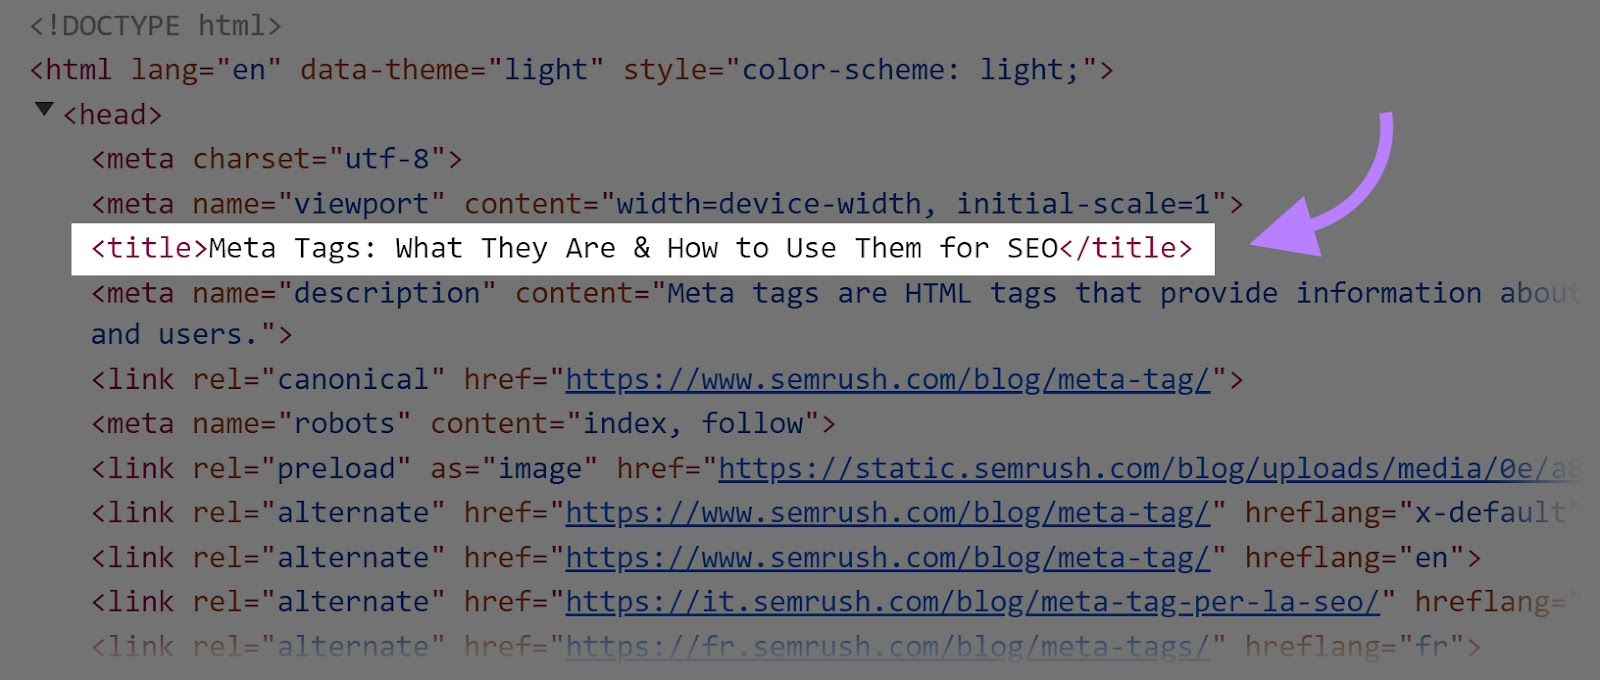 Title tag shown in the HTML code of a Semrush article.